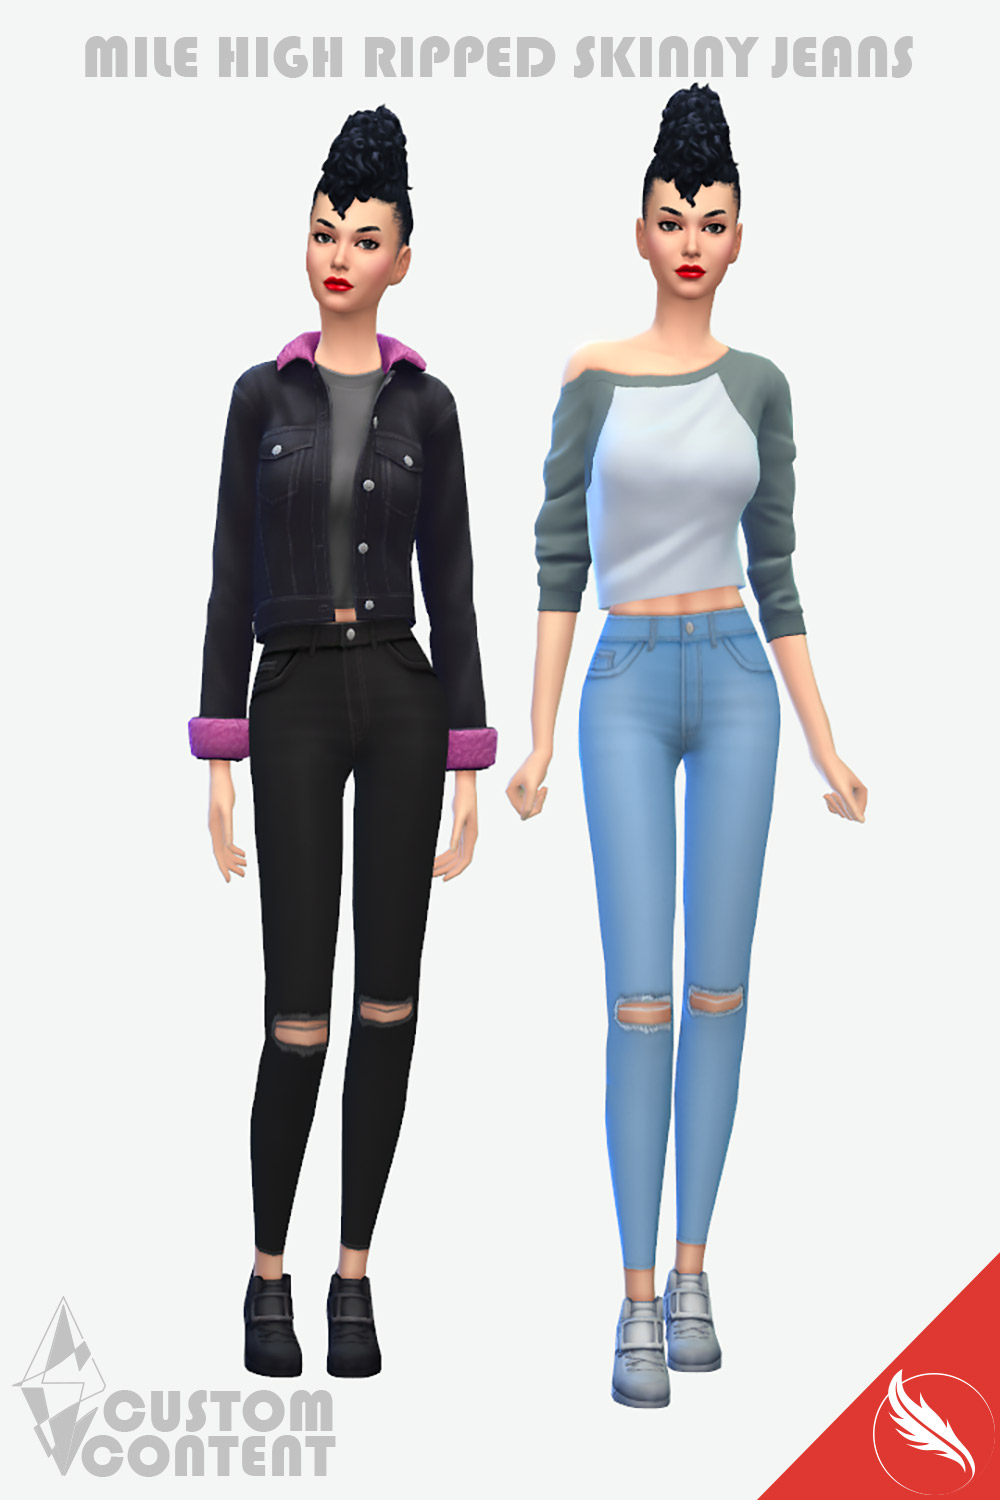 The Sims 4 Ripped Jeans CC